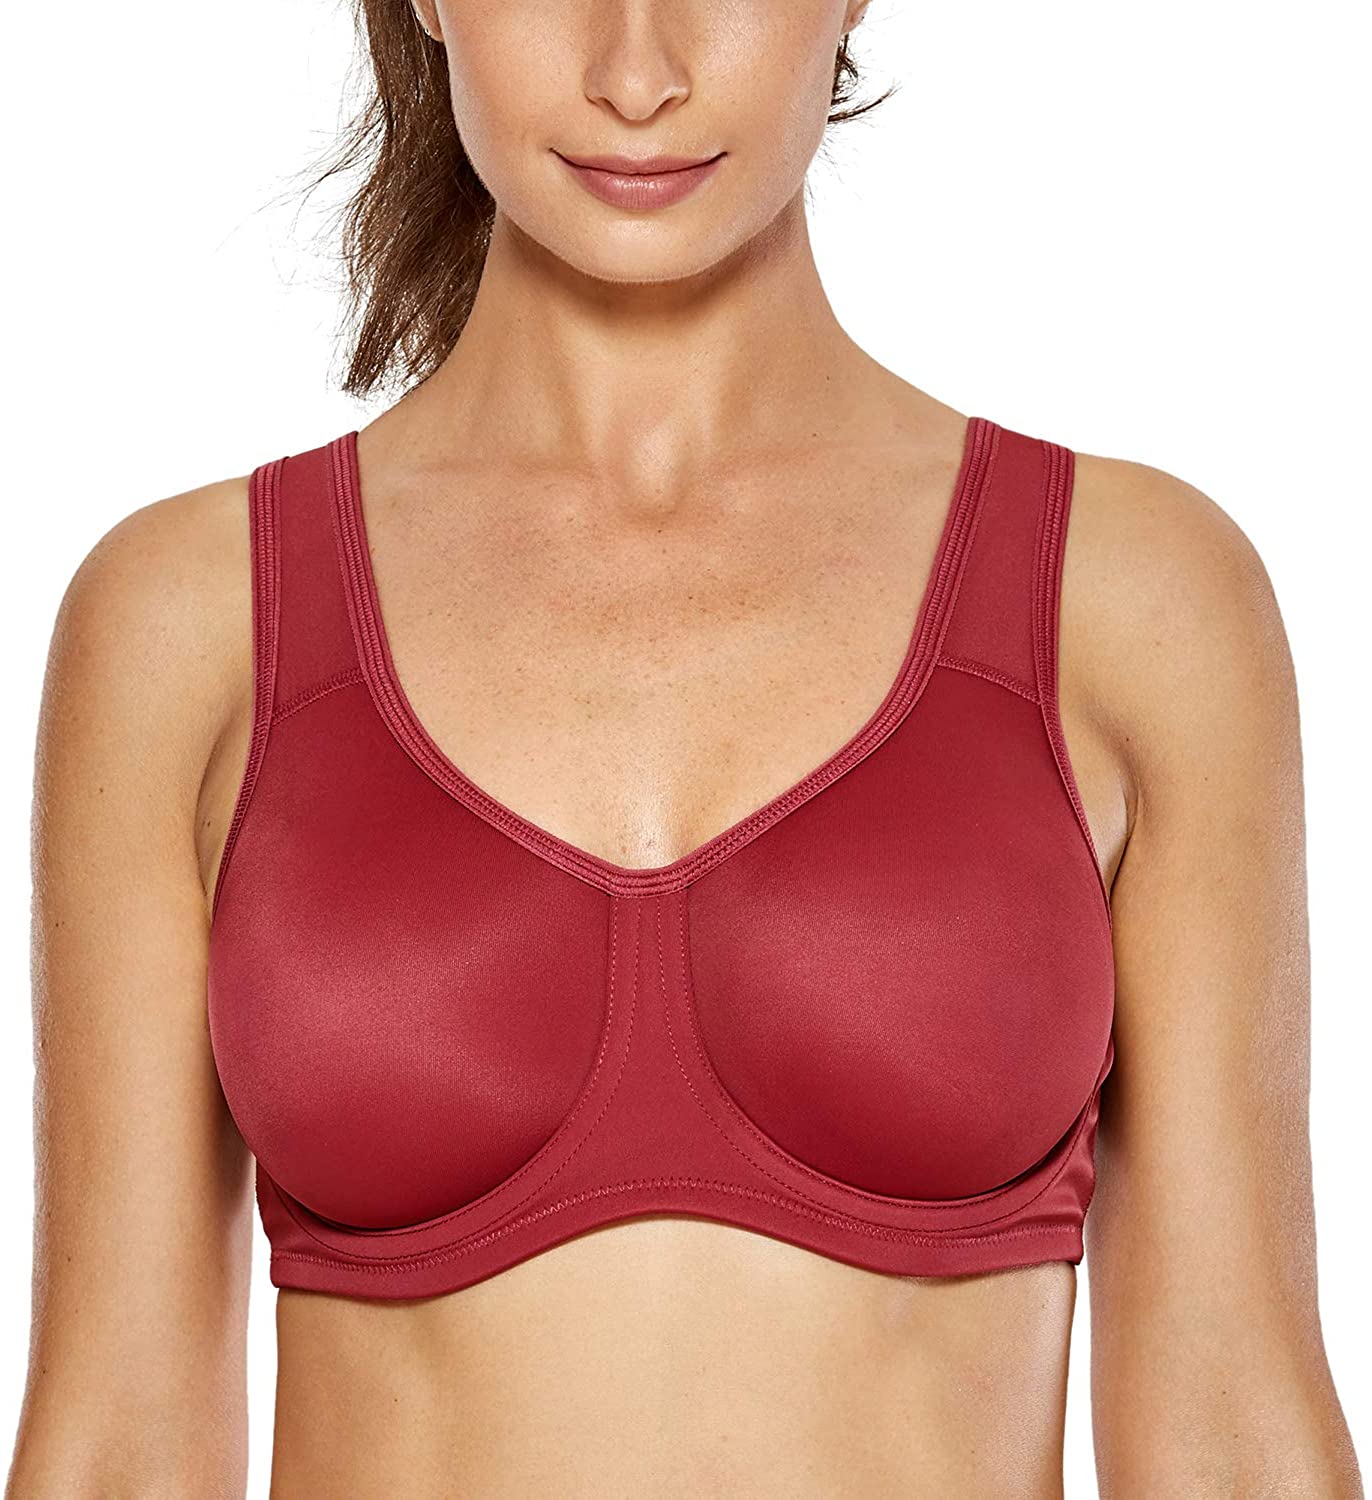 Best Plus-size Sports Bra with 'Outer' Underwire